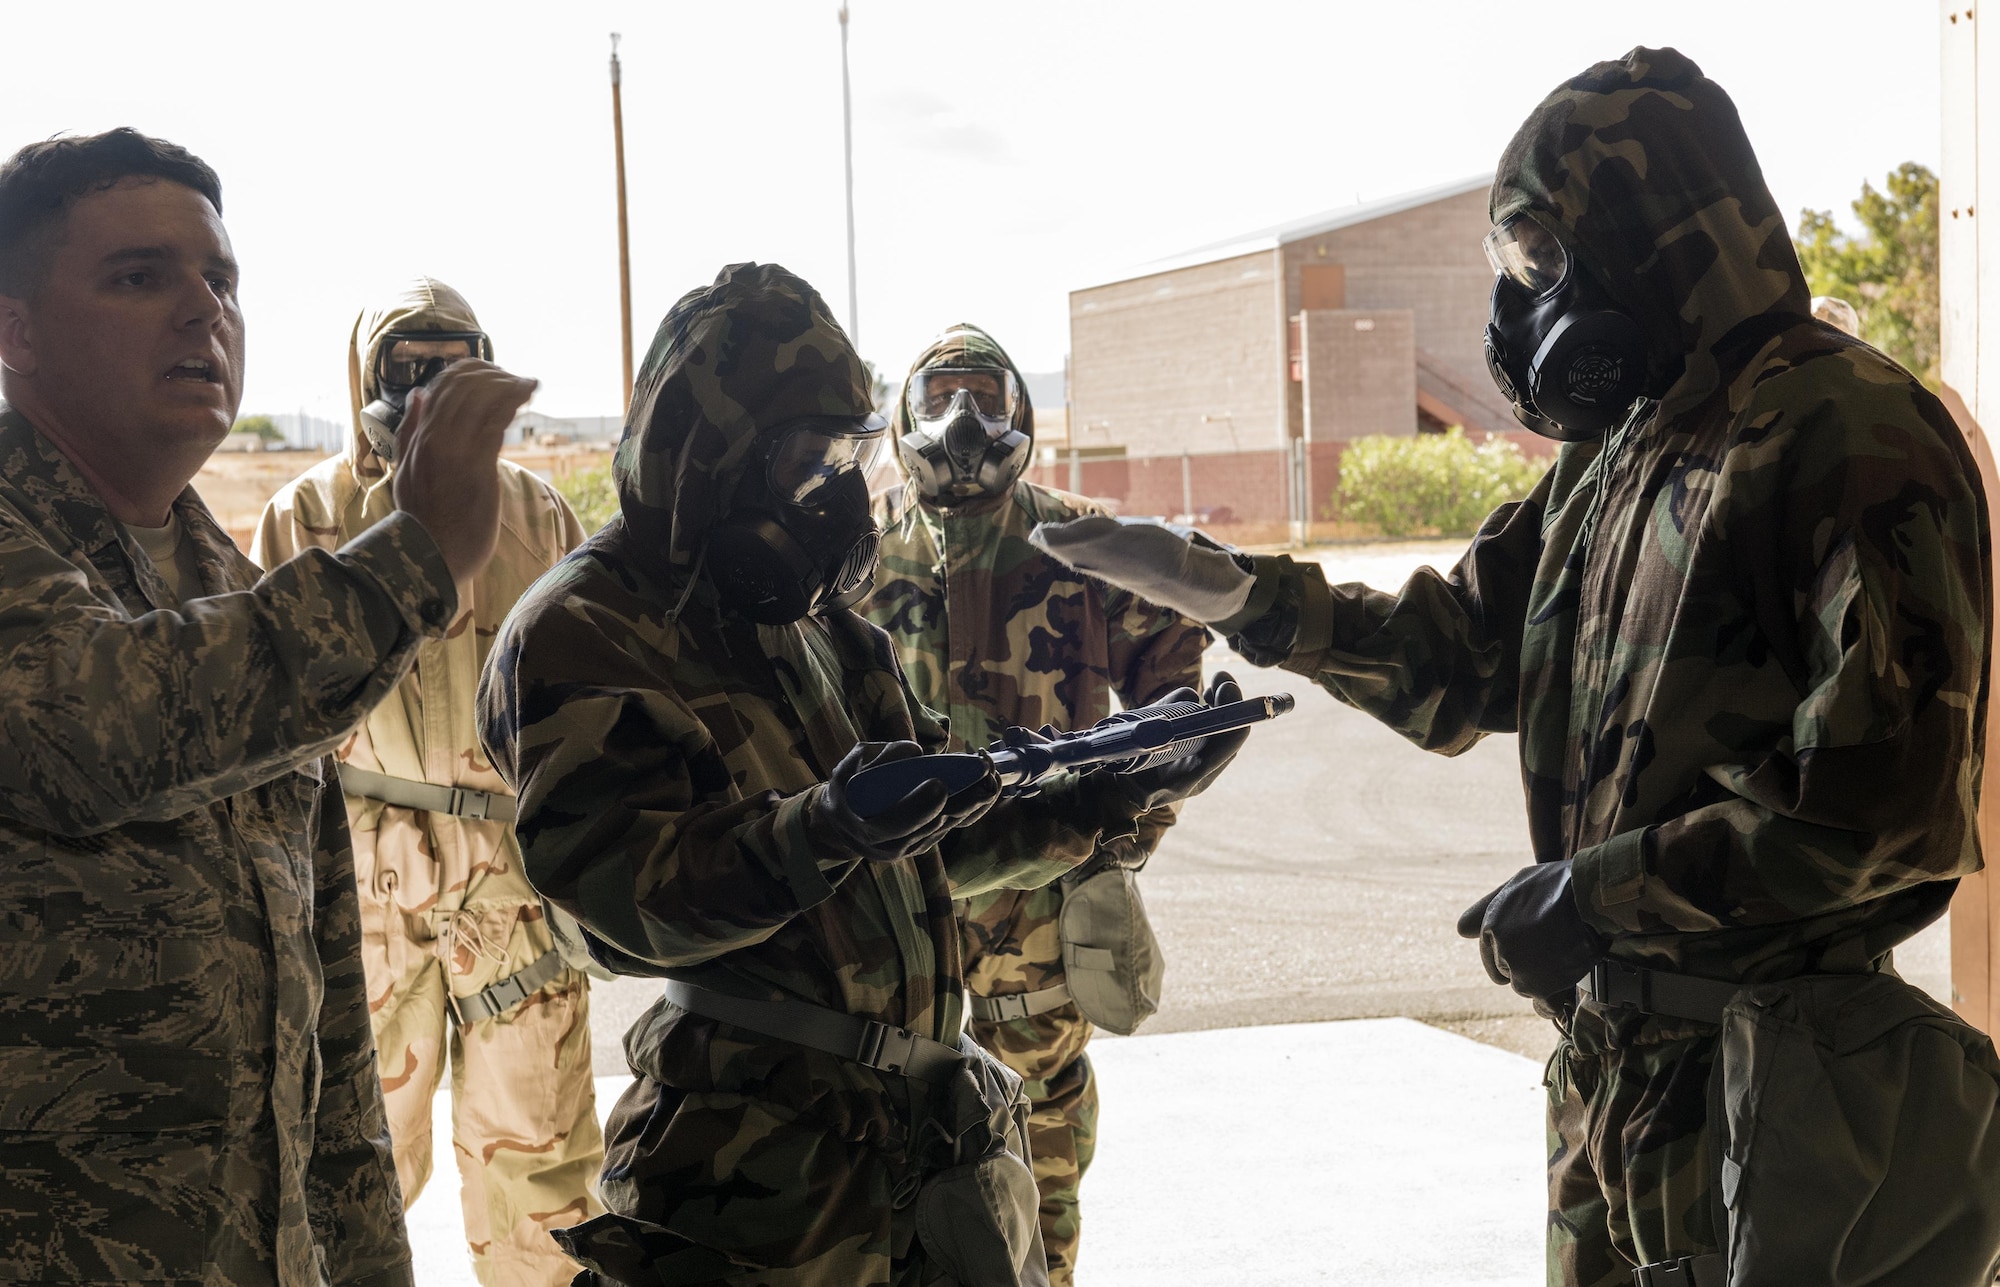 Tech Sgt. Donovan Root (left), 60th Civil Engineer Squadron, instructs Airmen on weapons decontamination during a chemical, biological, radiological and nuclear defense survival skills training course on Travis Air Force Base, Calif., Sep. 21, 2017. CBRN defenses are protective measures taken in situations in which chemical, biological, radiological or nuclear warfare (including terrorism) hazards may be present. CBRN defense consists of CBRN passive protection, contamination avoidance and CBRN mitigation. (U.S. Air Force photo by Heide Couch)